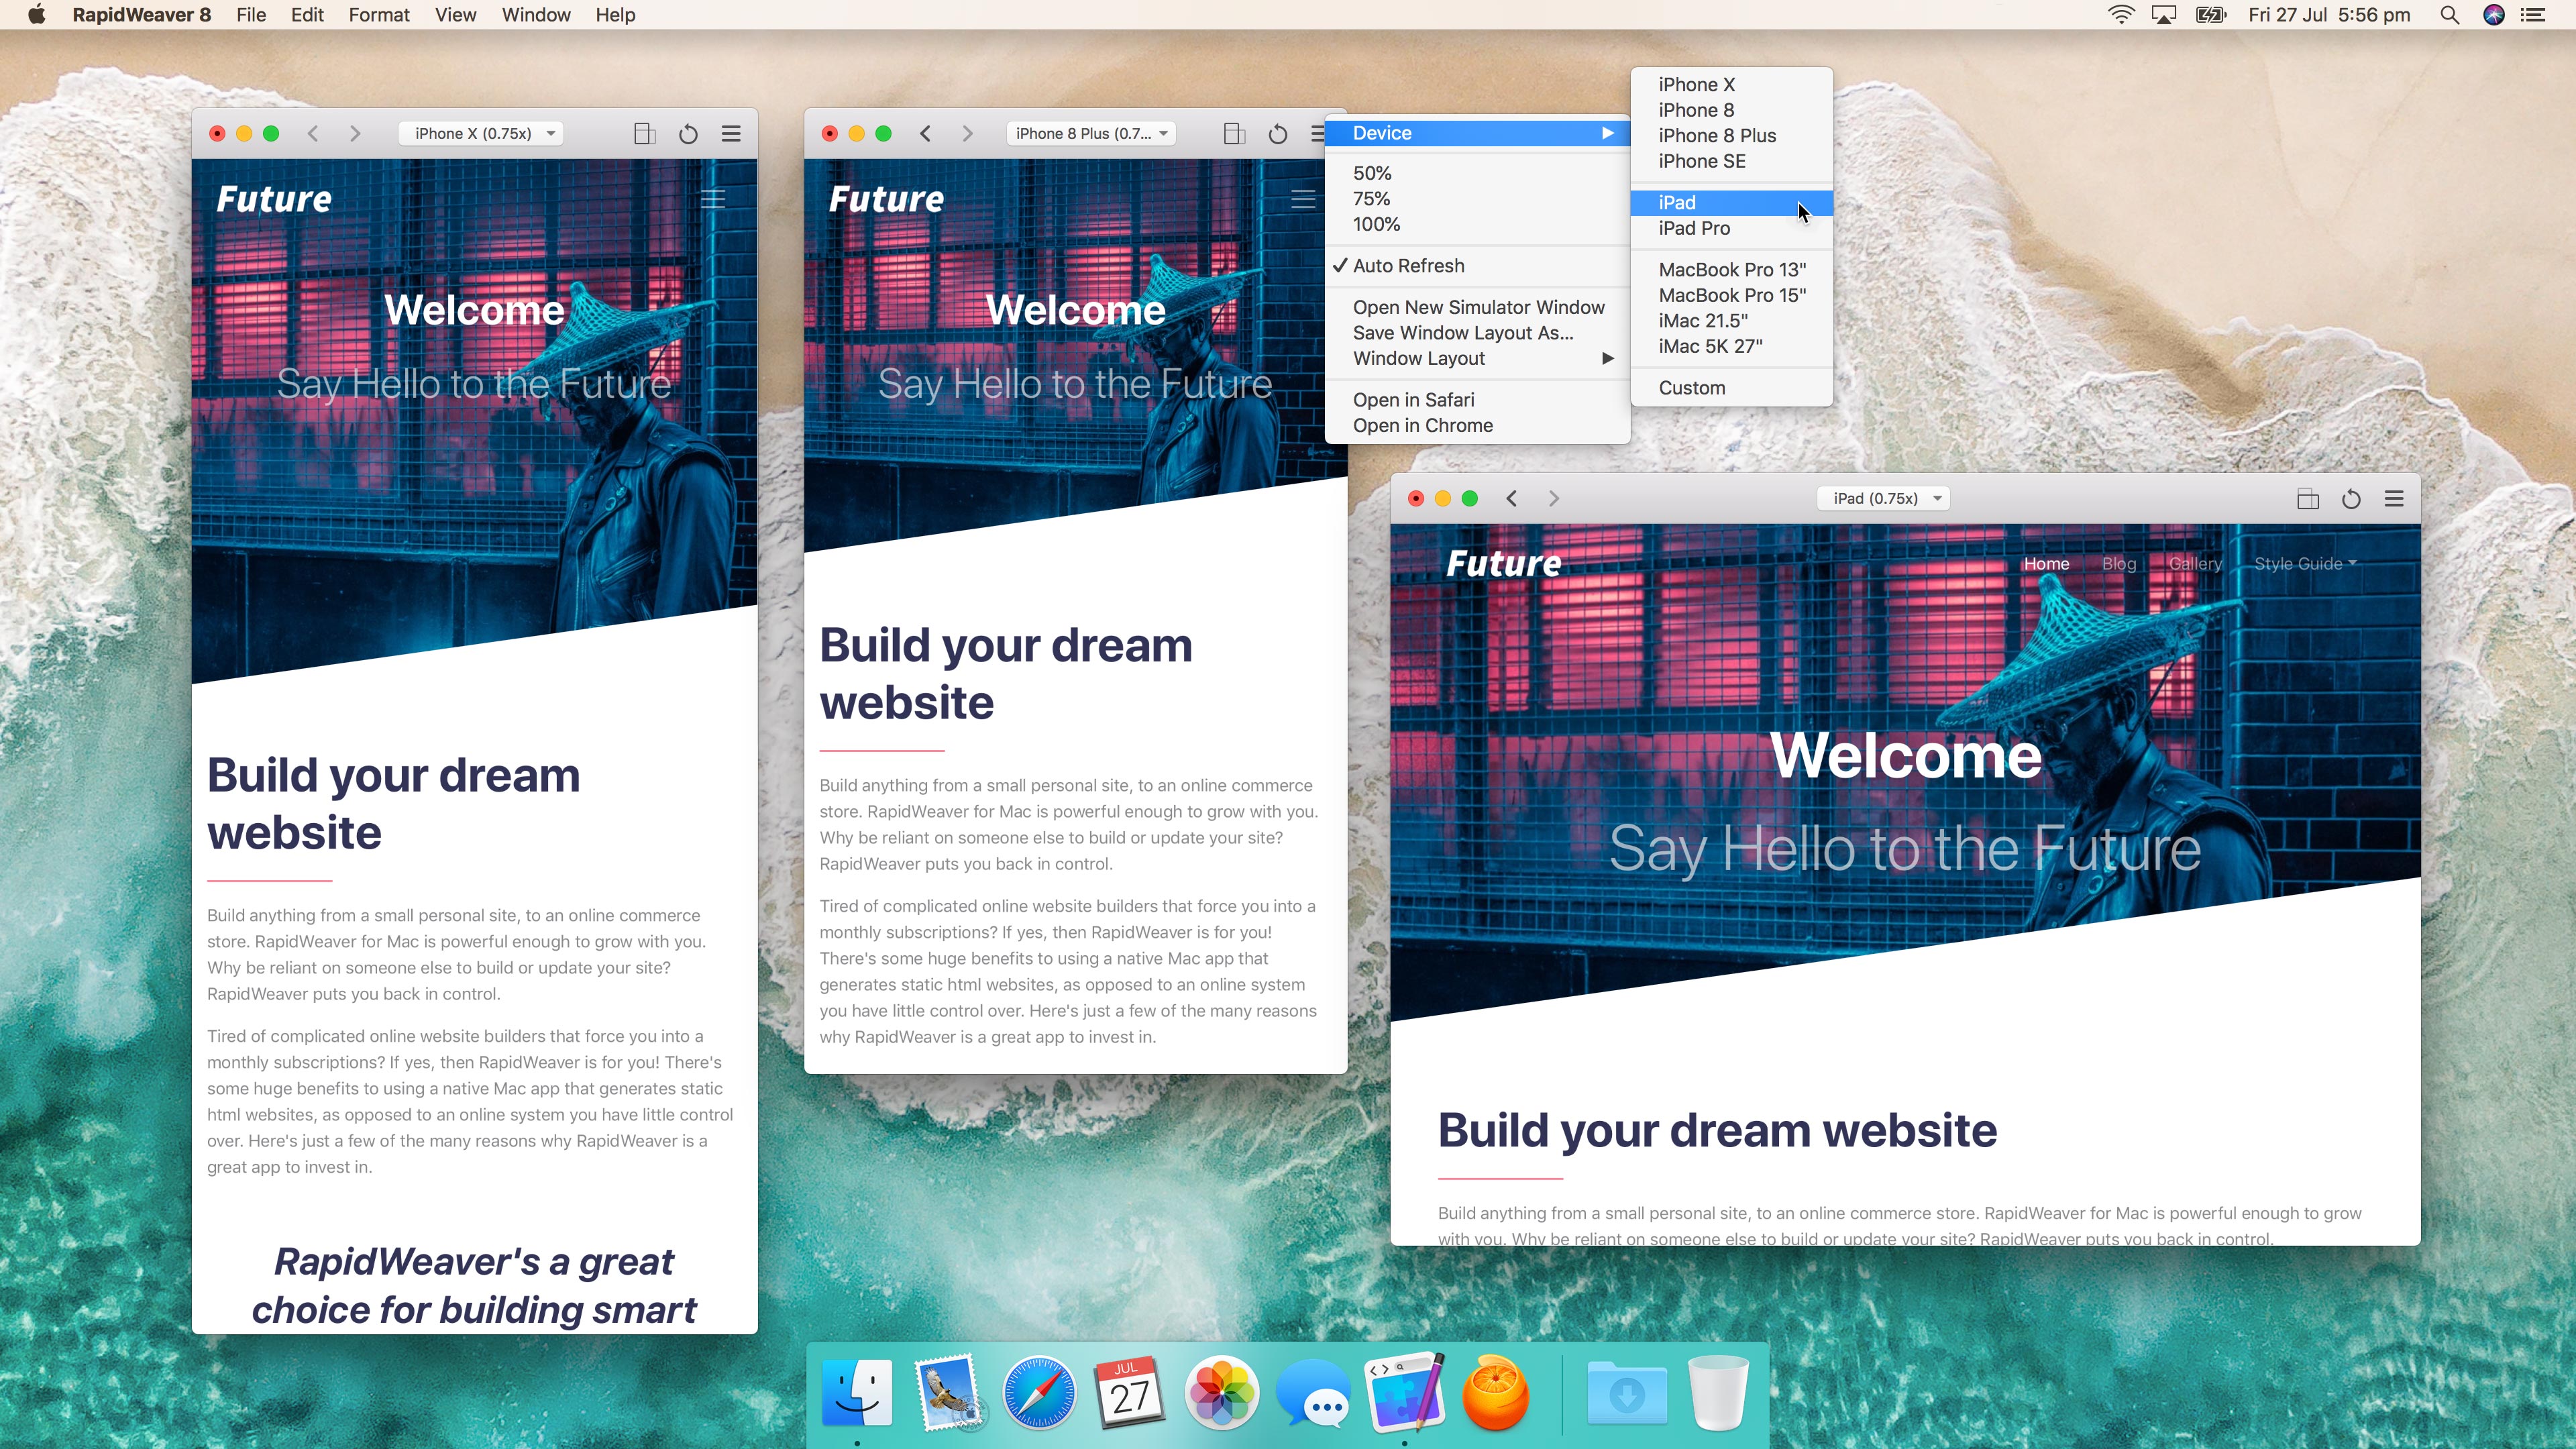 What Is The Best Web Page Design Software For Mac